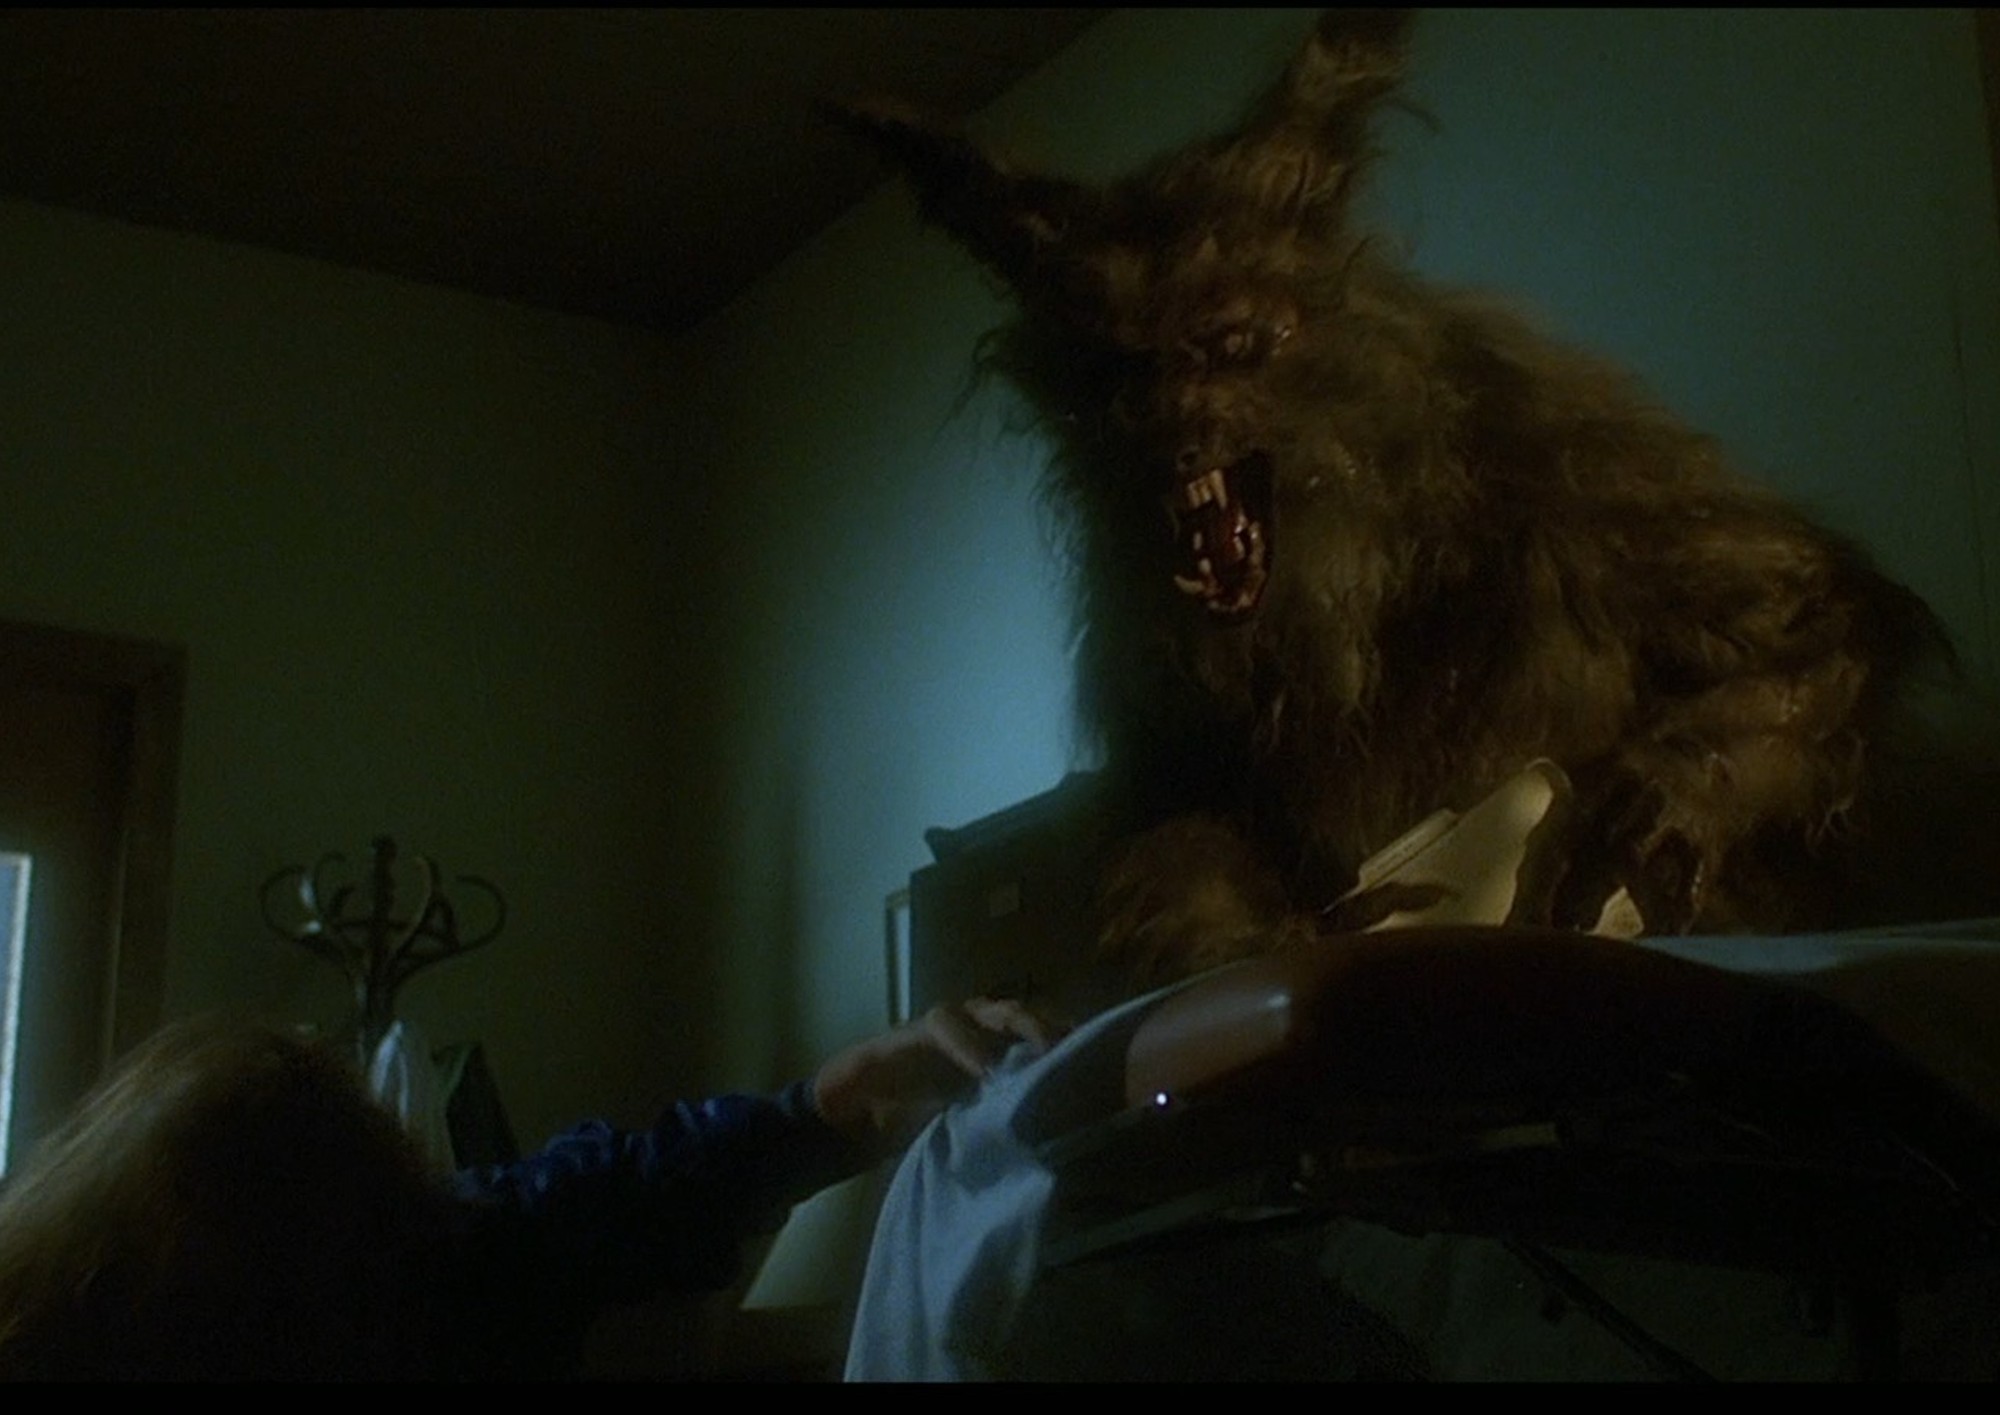 Image from the motion picture The Howling